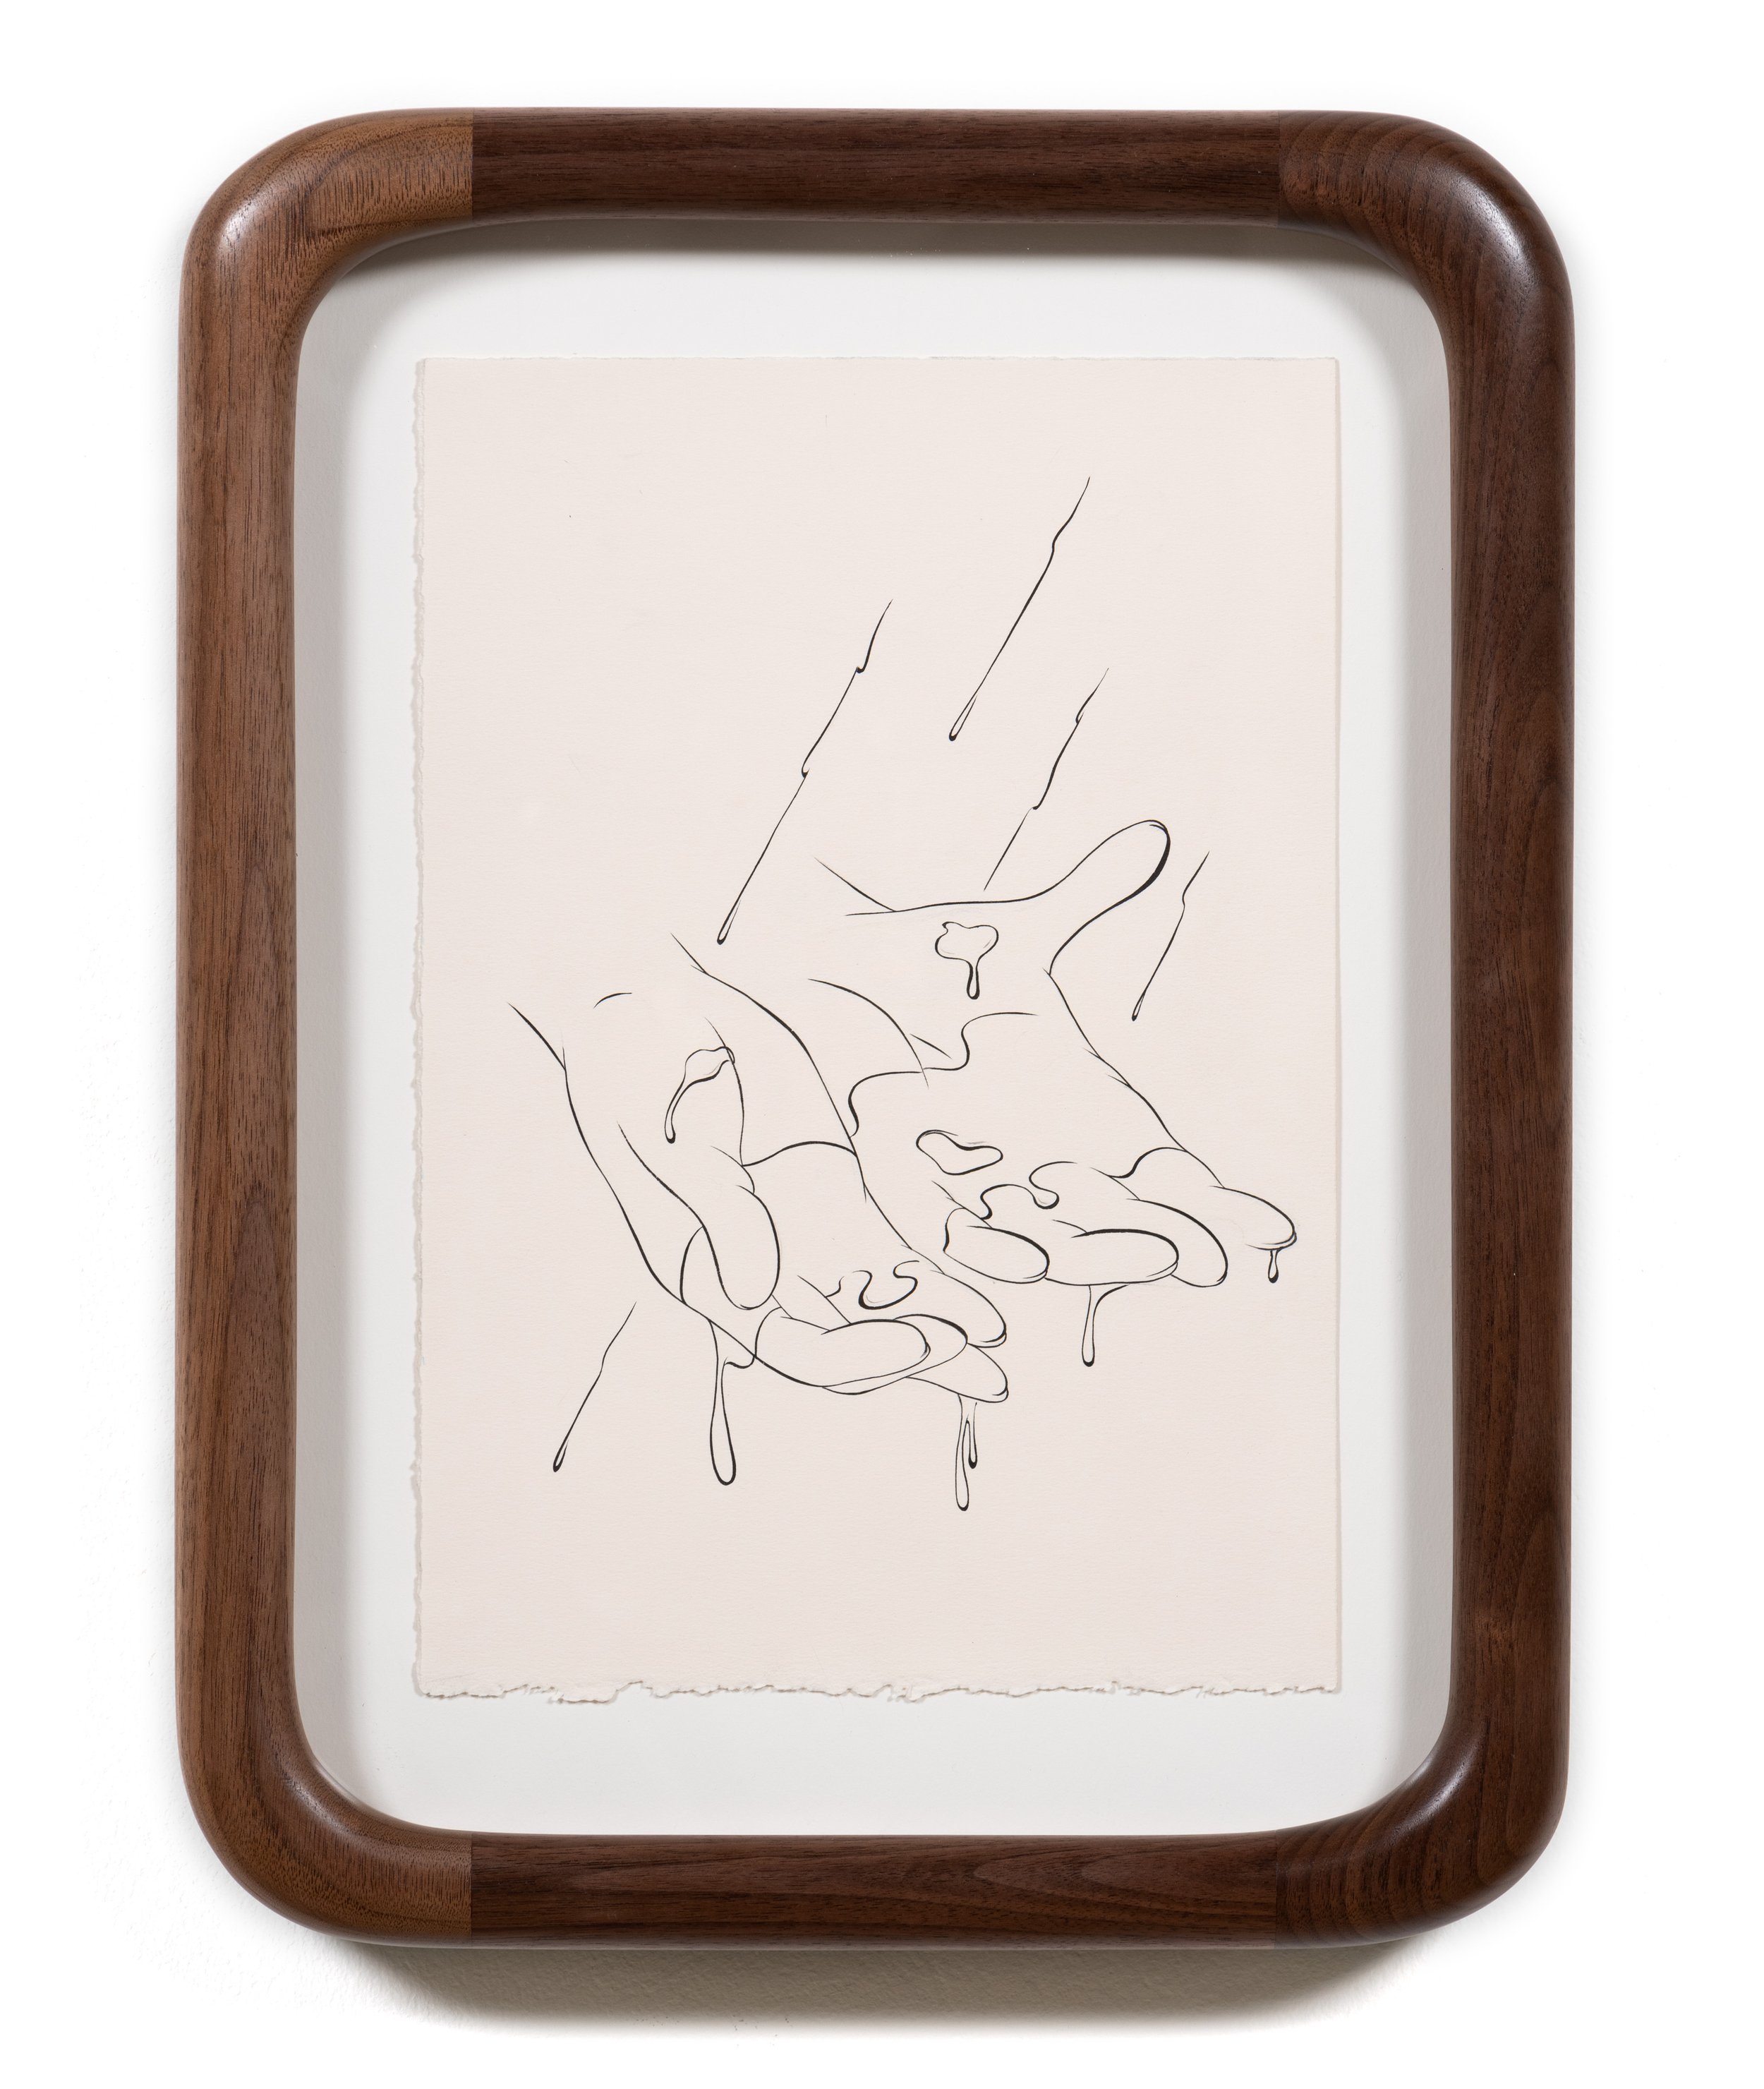   Drown (Nonsense) , 2021  Ink on paper, artist’s frame  15 x 11 1/2 x 2 inches&nbsp; 